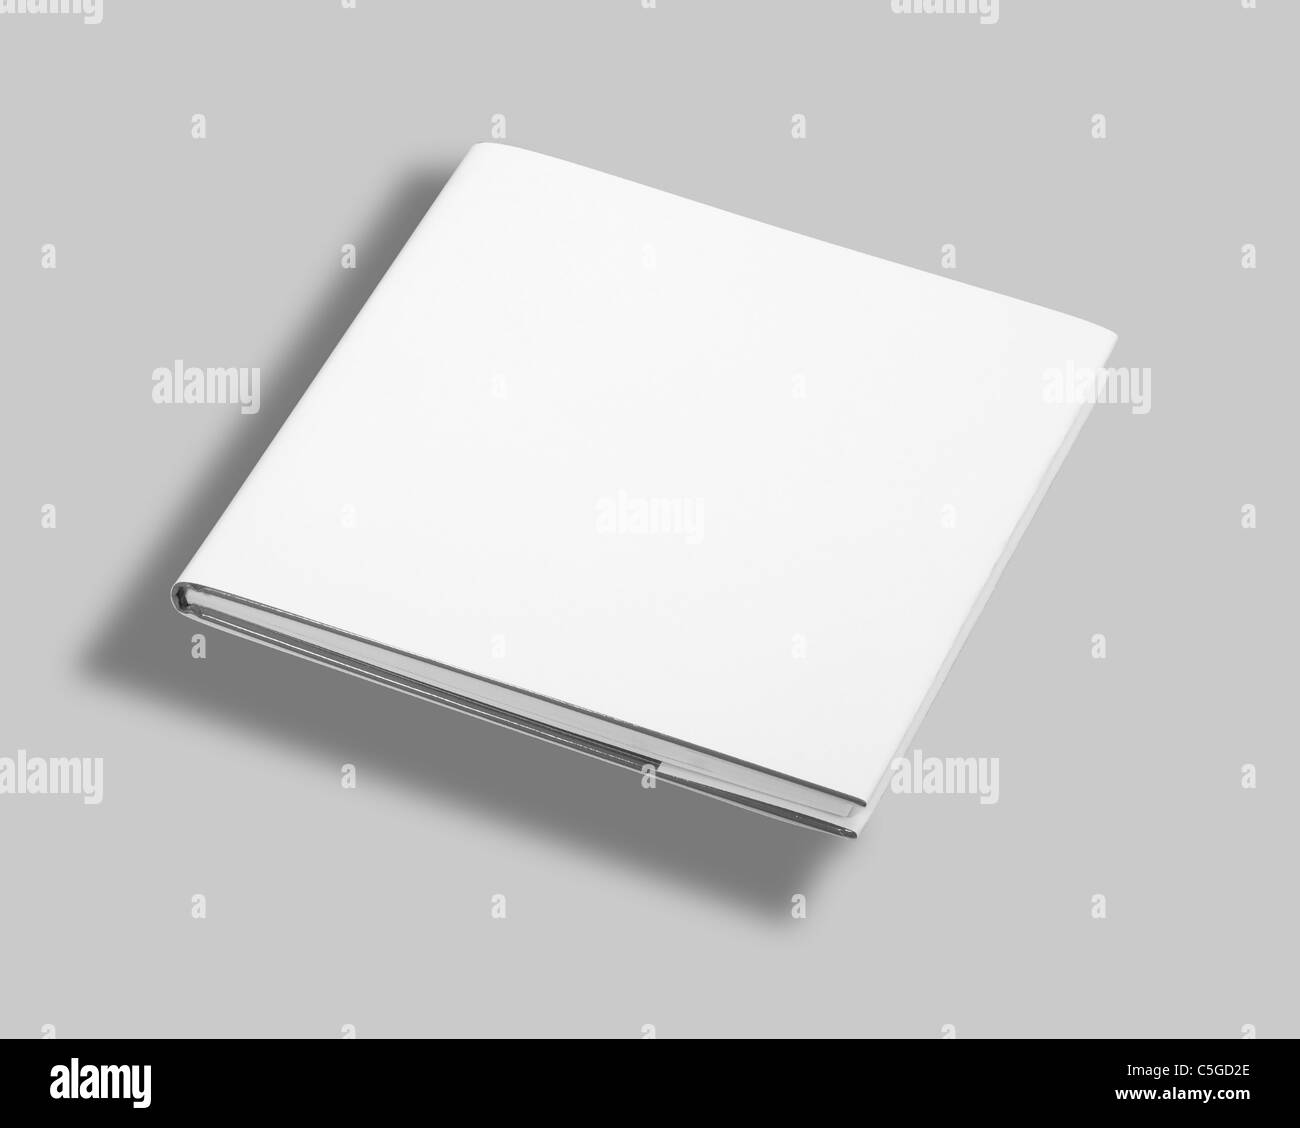 Blank book white cover w clipping path Stock Photo